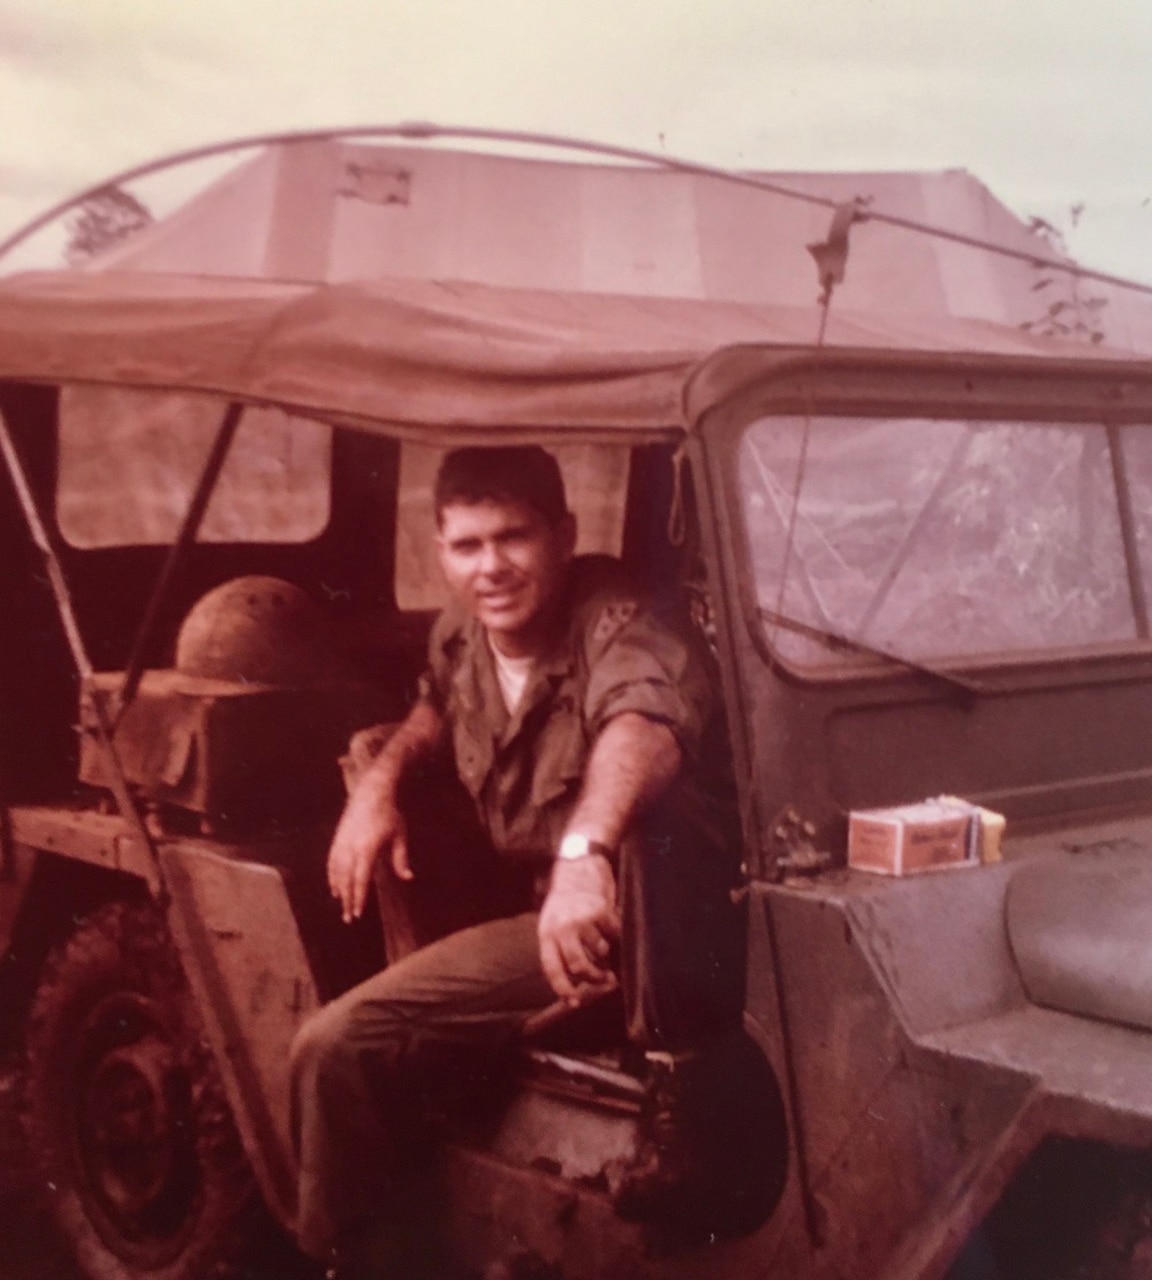 A young man in Vietnam-era Army fatigues looks out from a jeep.